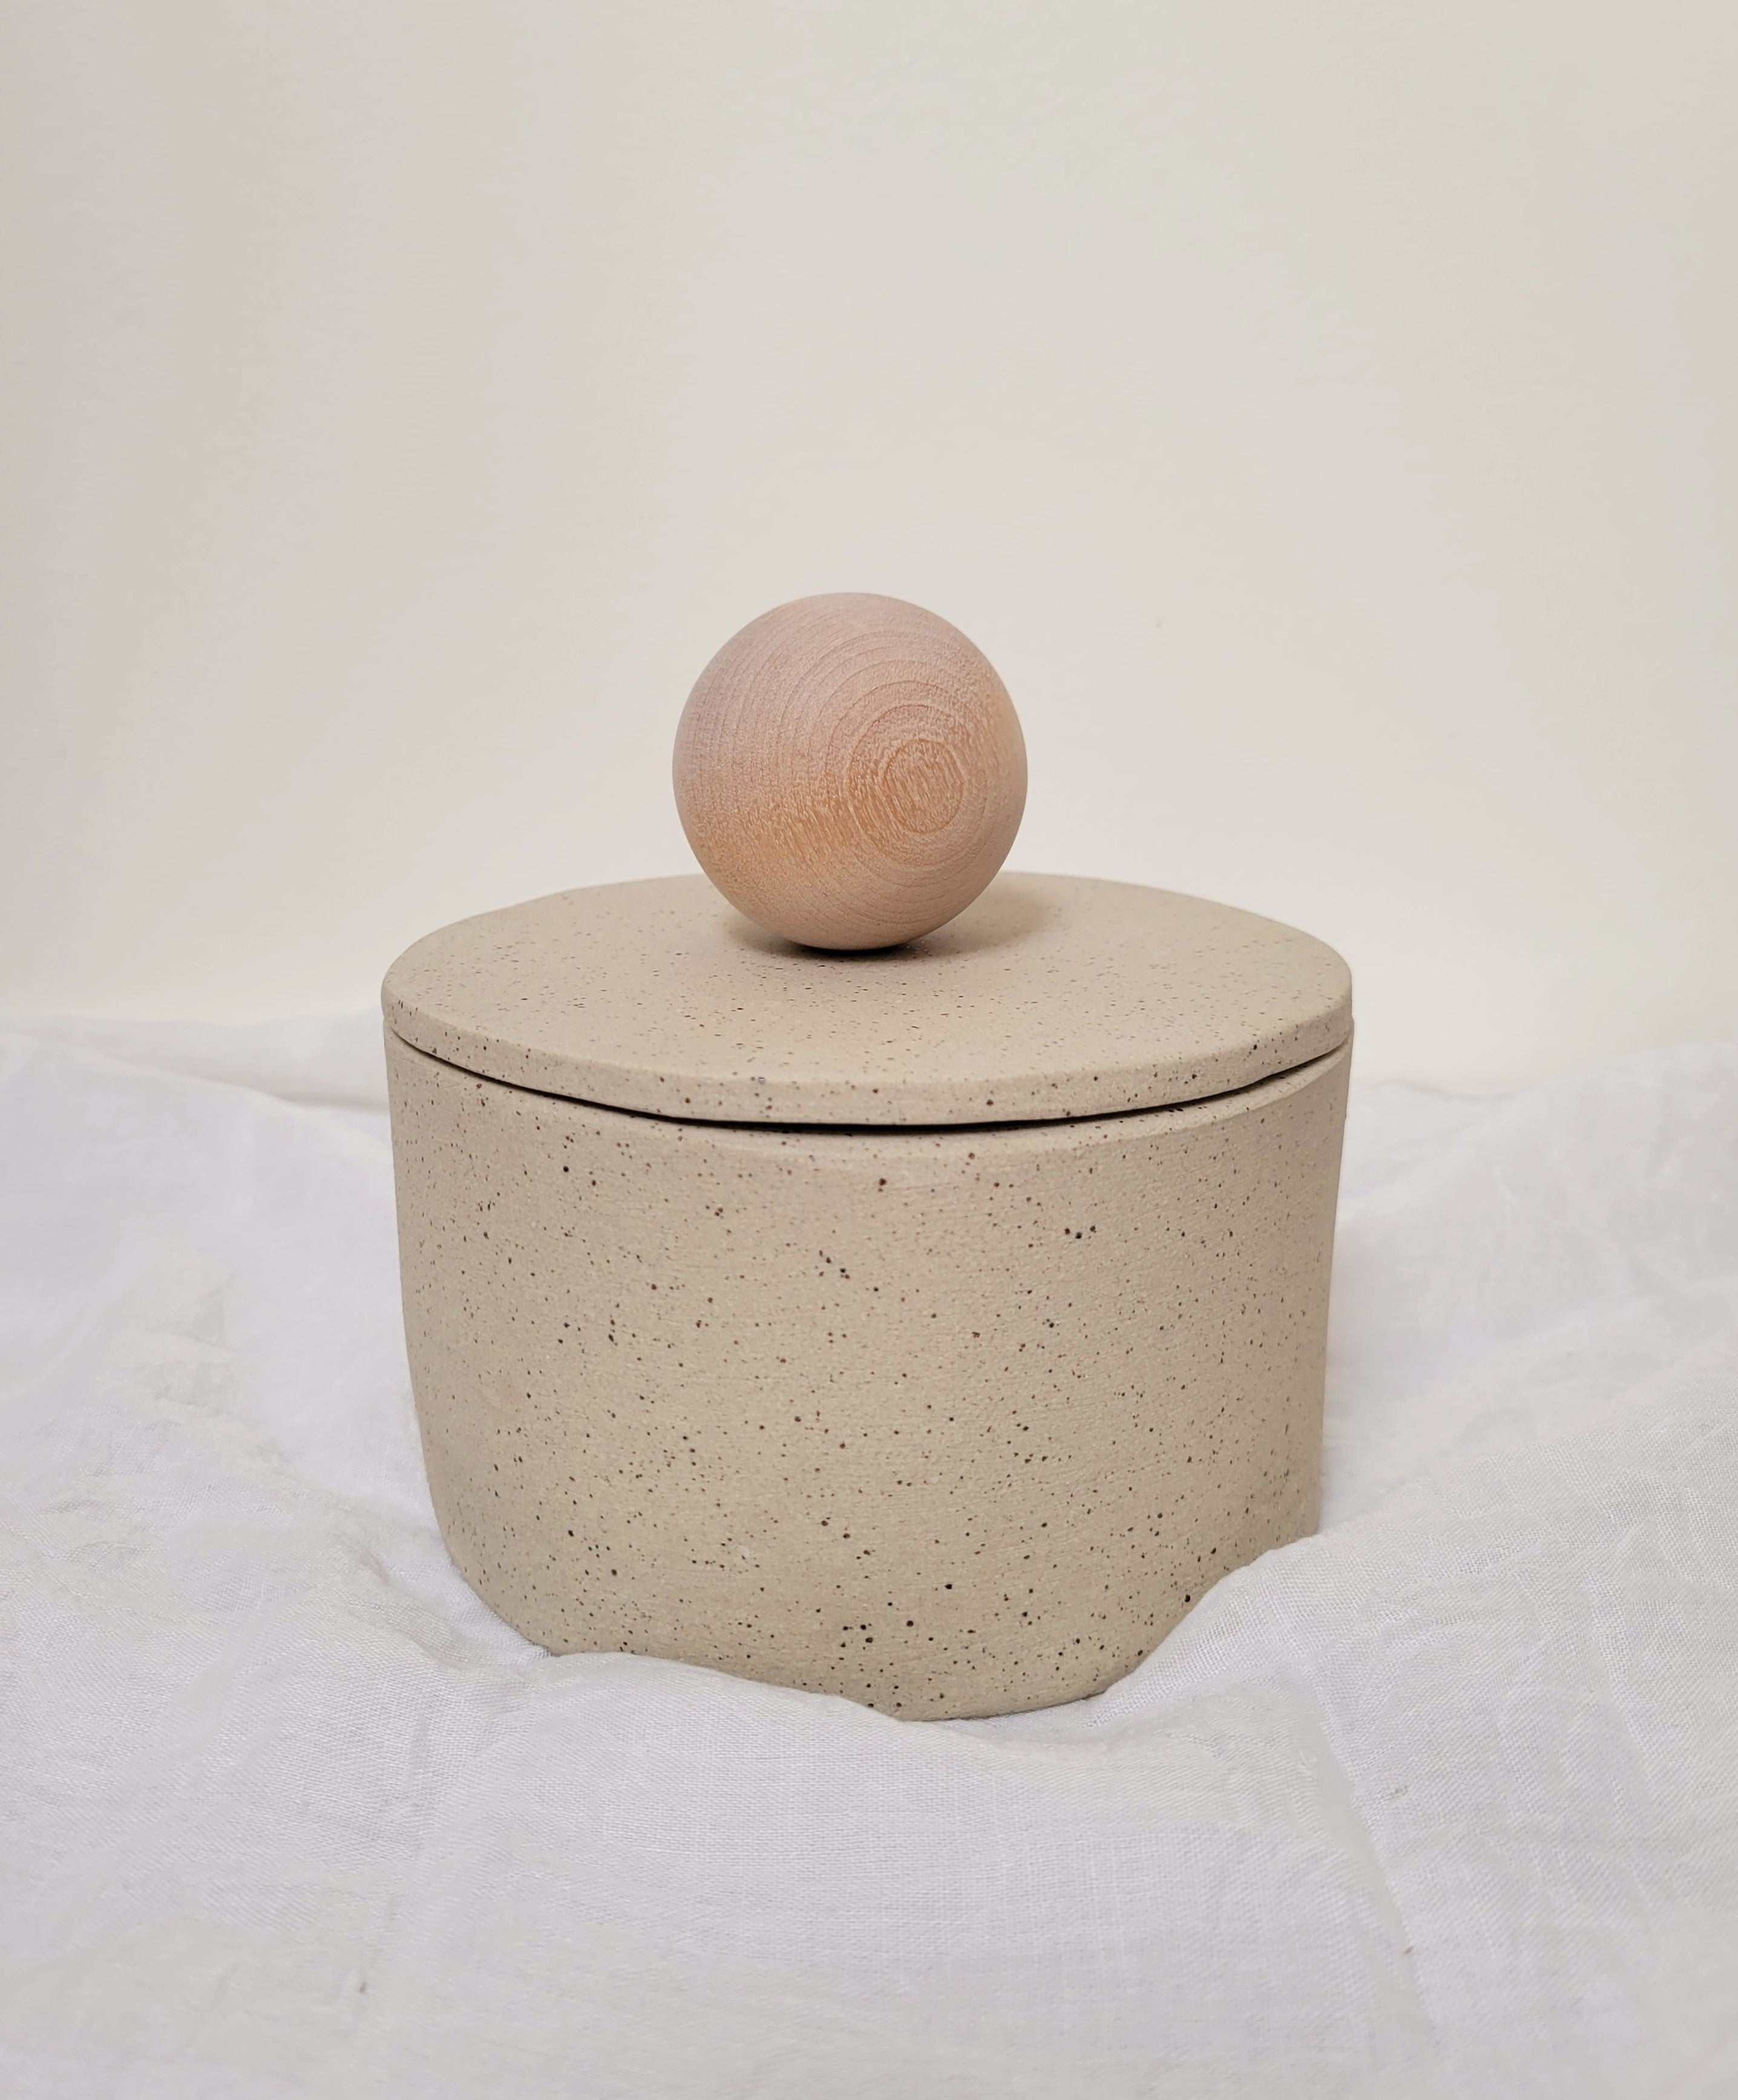 Cream Ceramic Pottery Container With Wood Ball